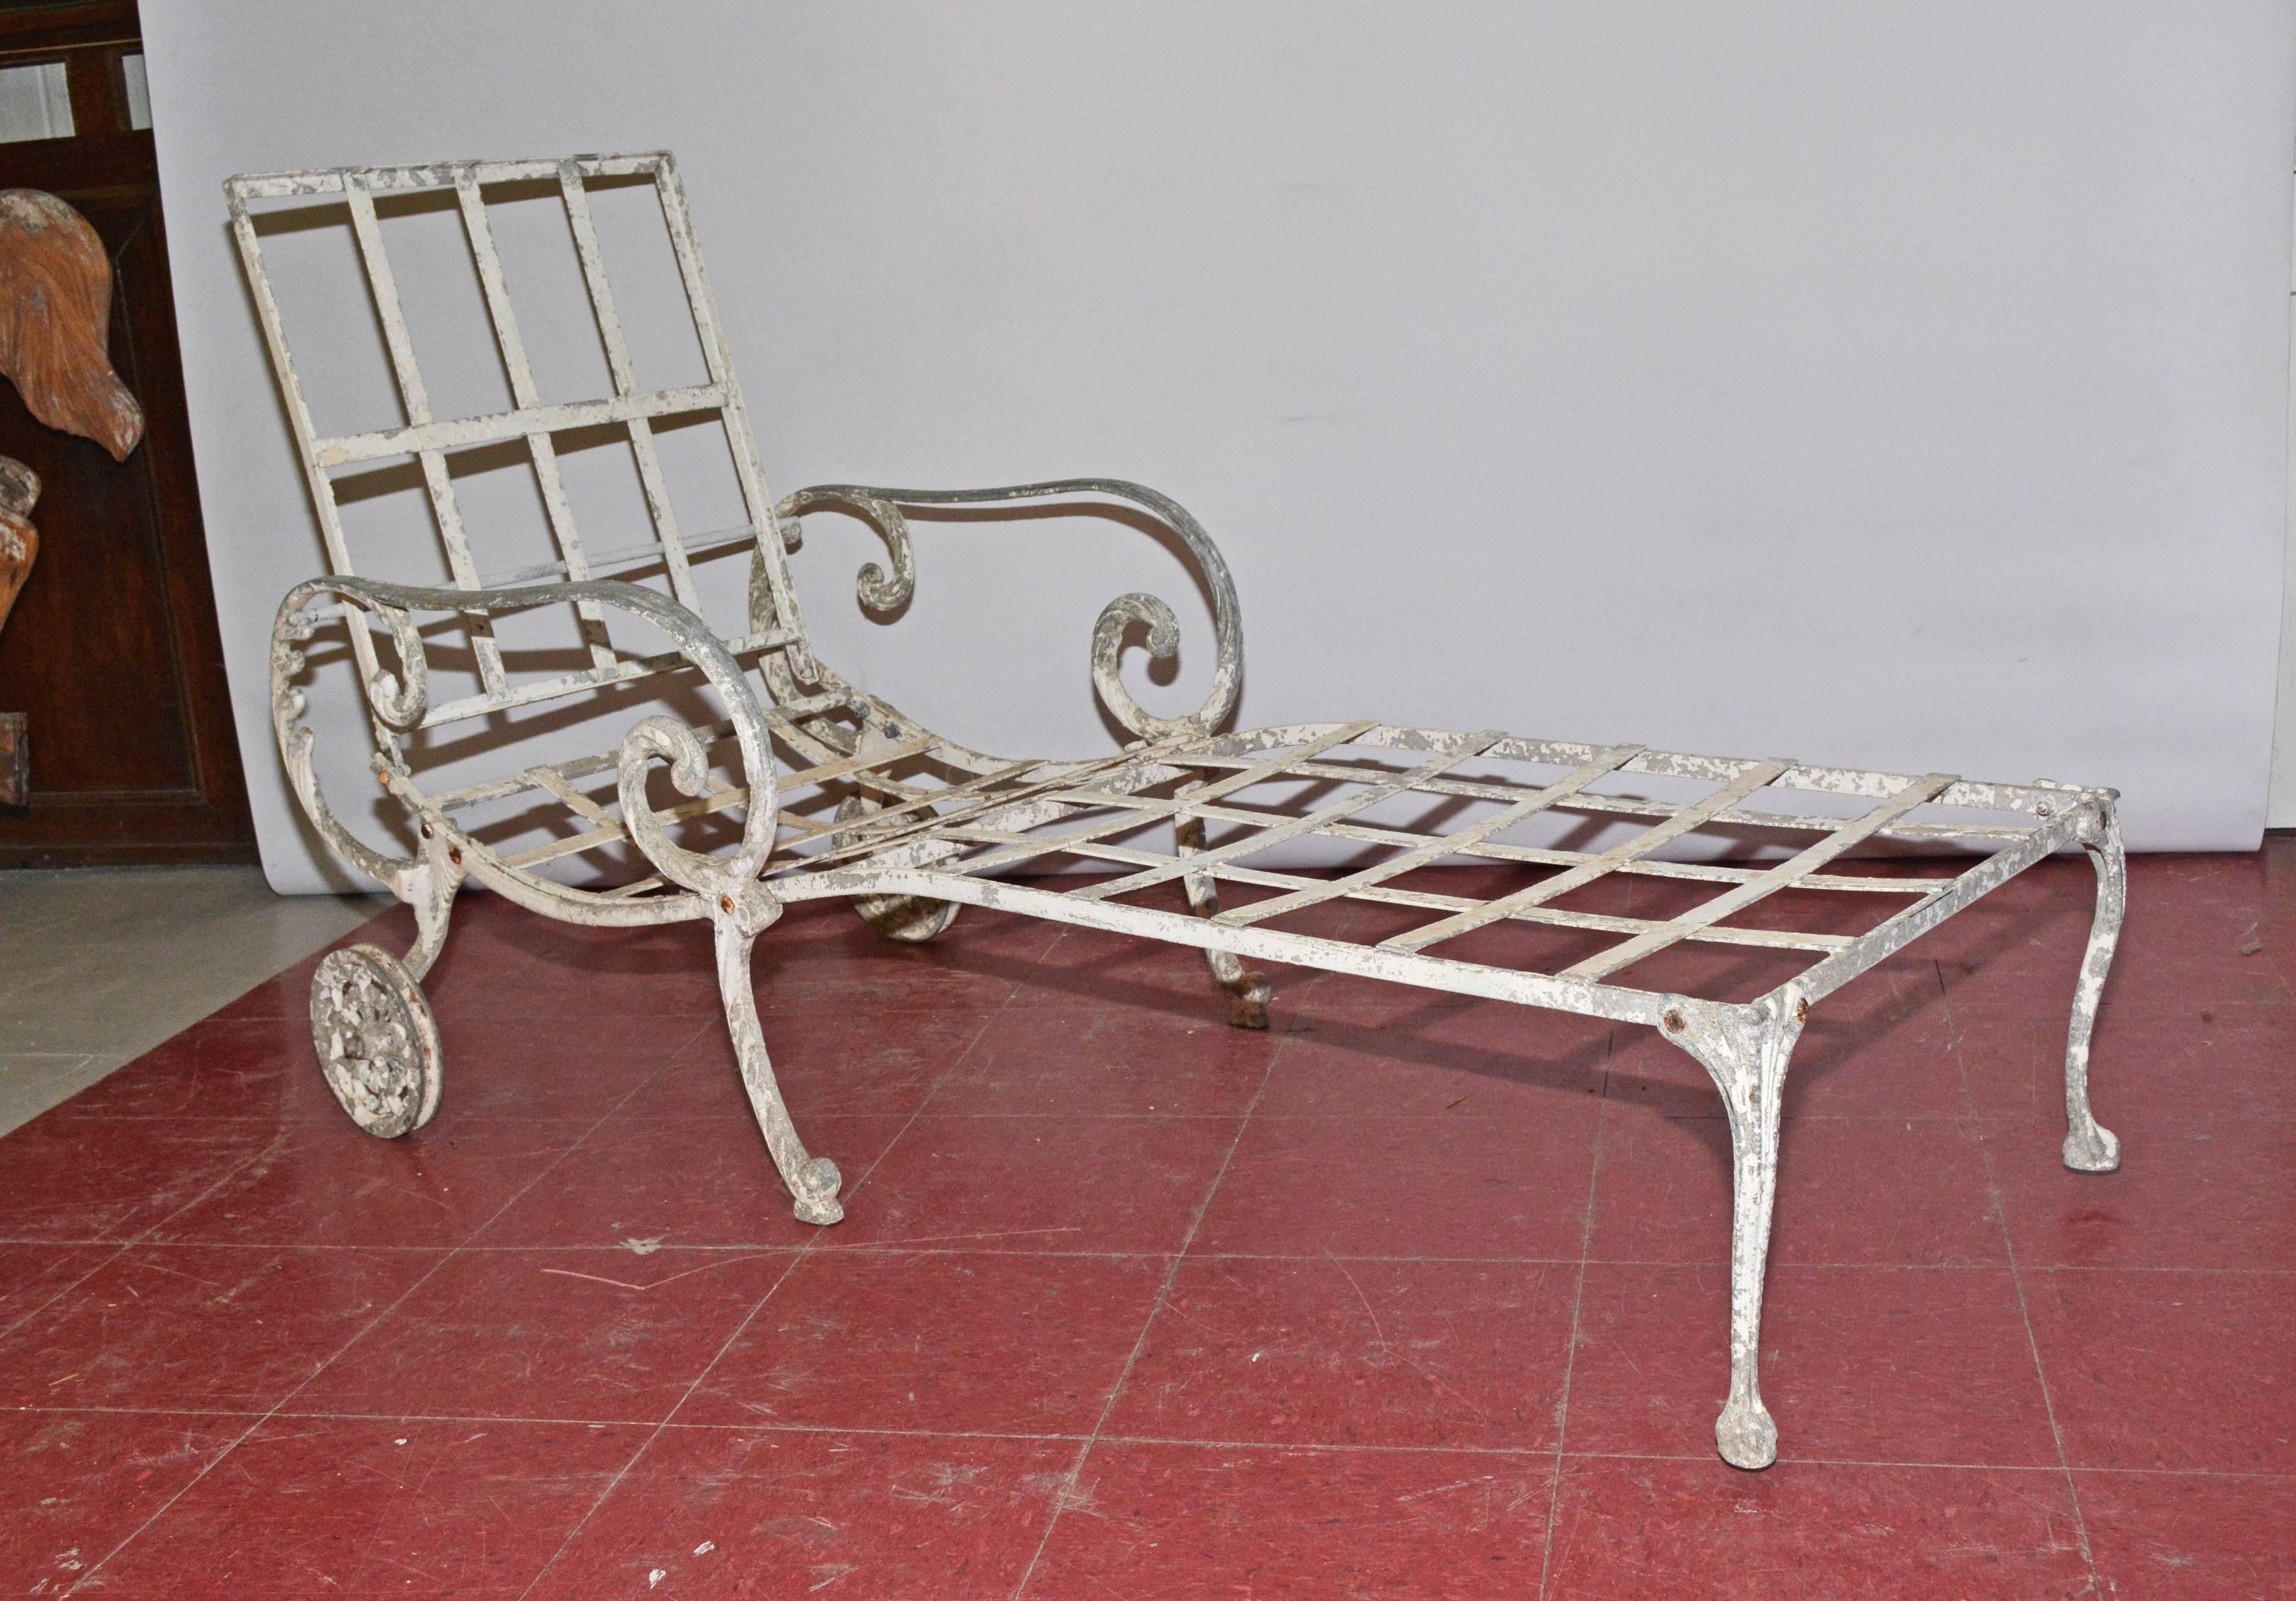 The vintage white wrought iron outdoor reclining chaise longue is moveable with its pair of wheels. The backrests on a moveable bar for flexible positioning or folds down for storage. The back and seat have criss-cross slats that will hold cushions